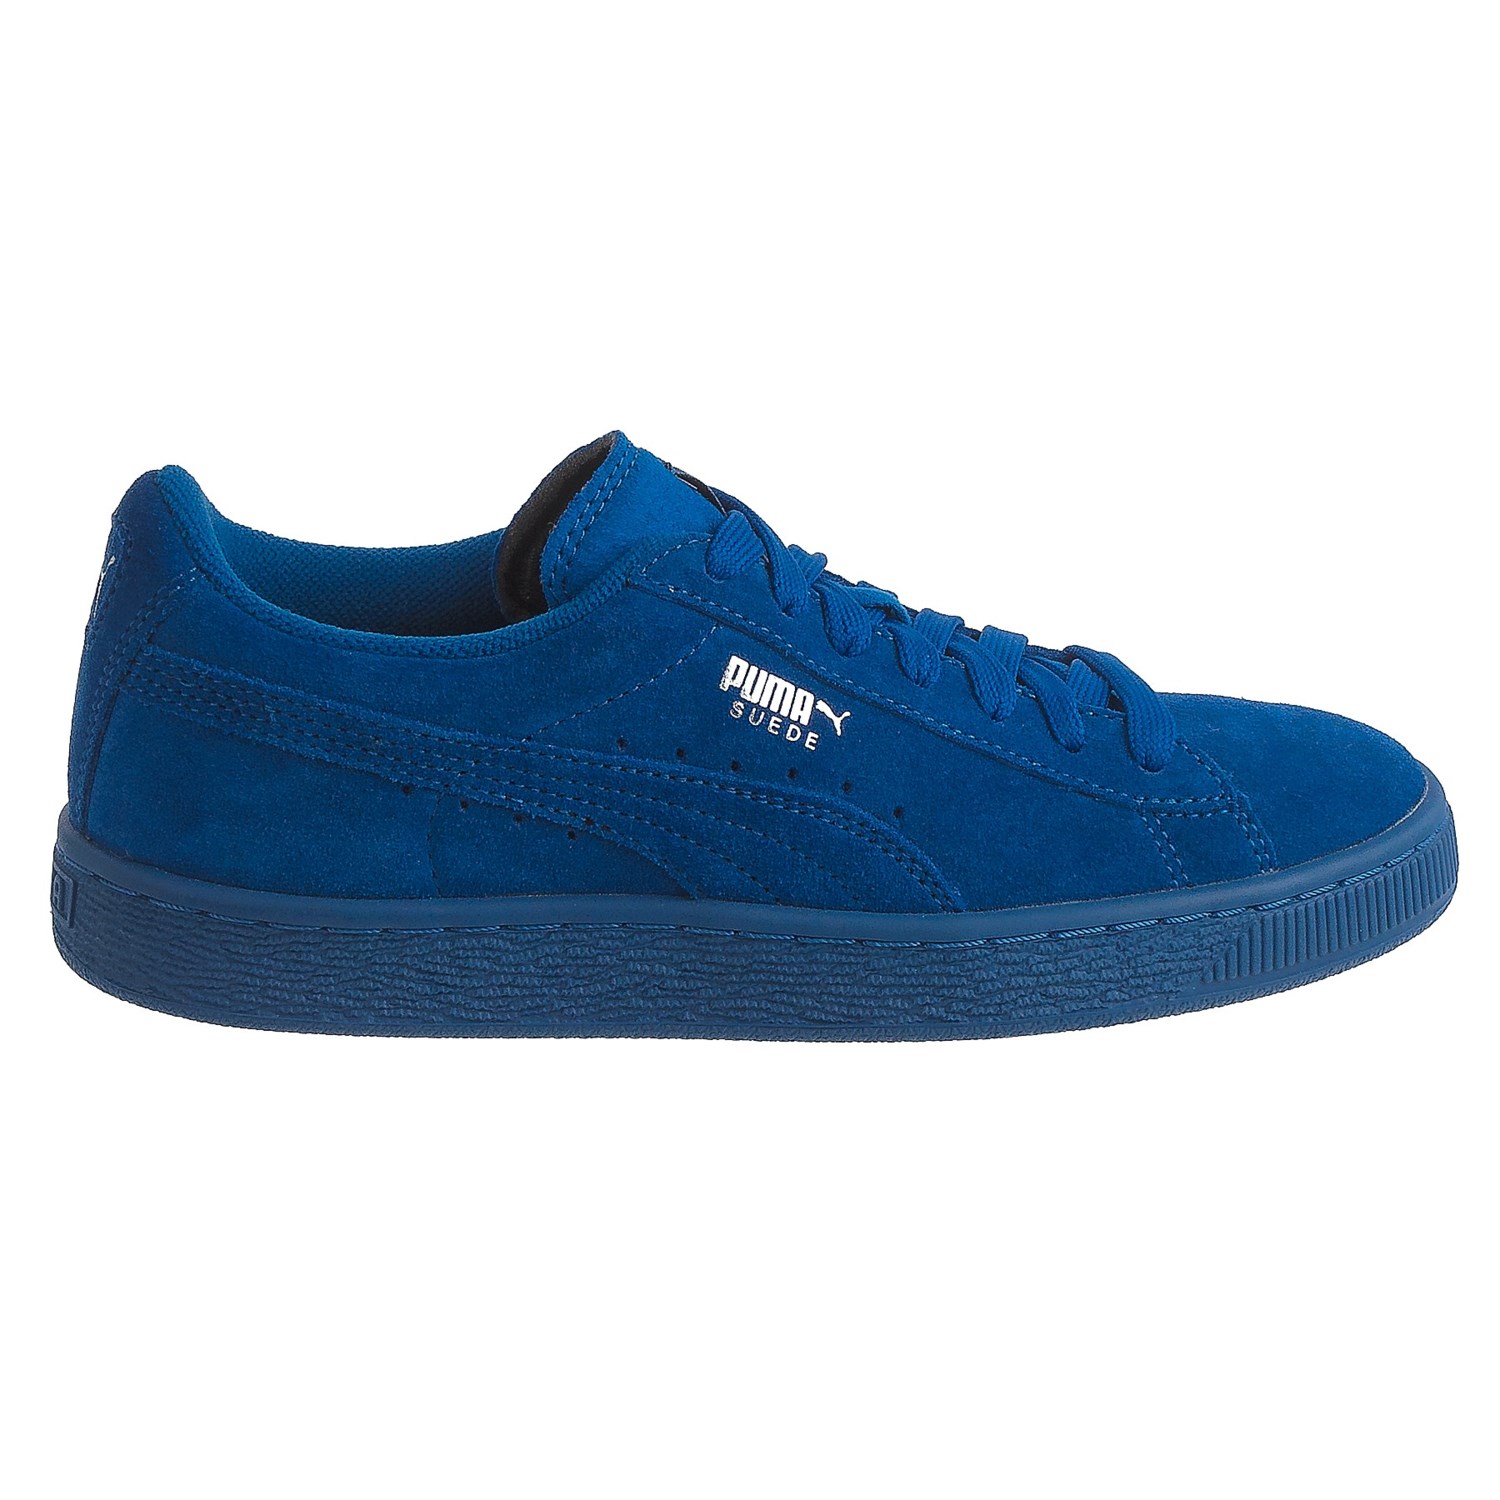 Puma Suede Jr. Classic Sneakers (For Big Boys) - Save 63%